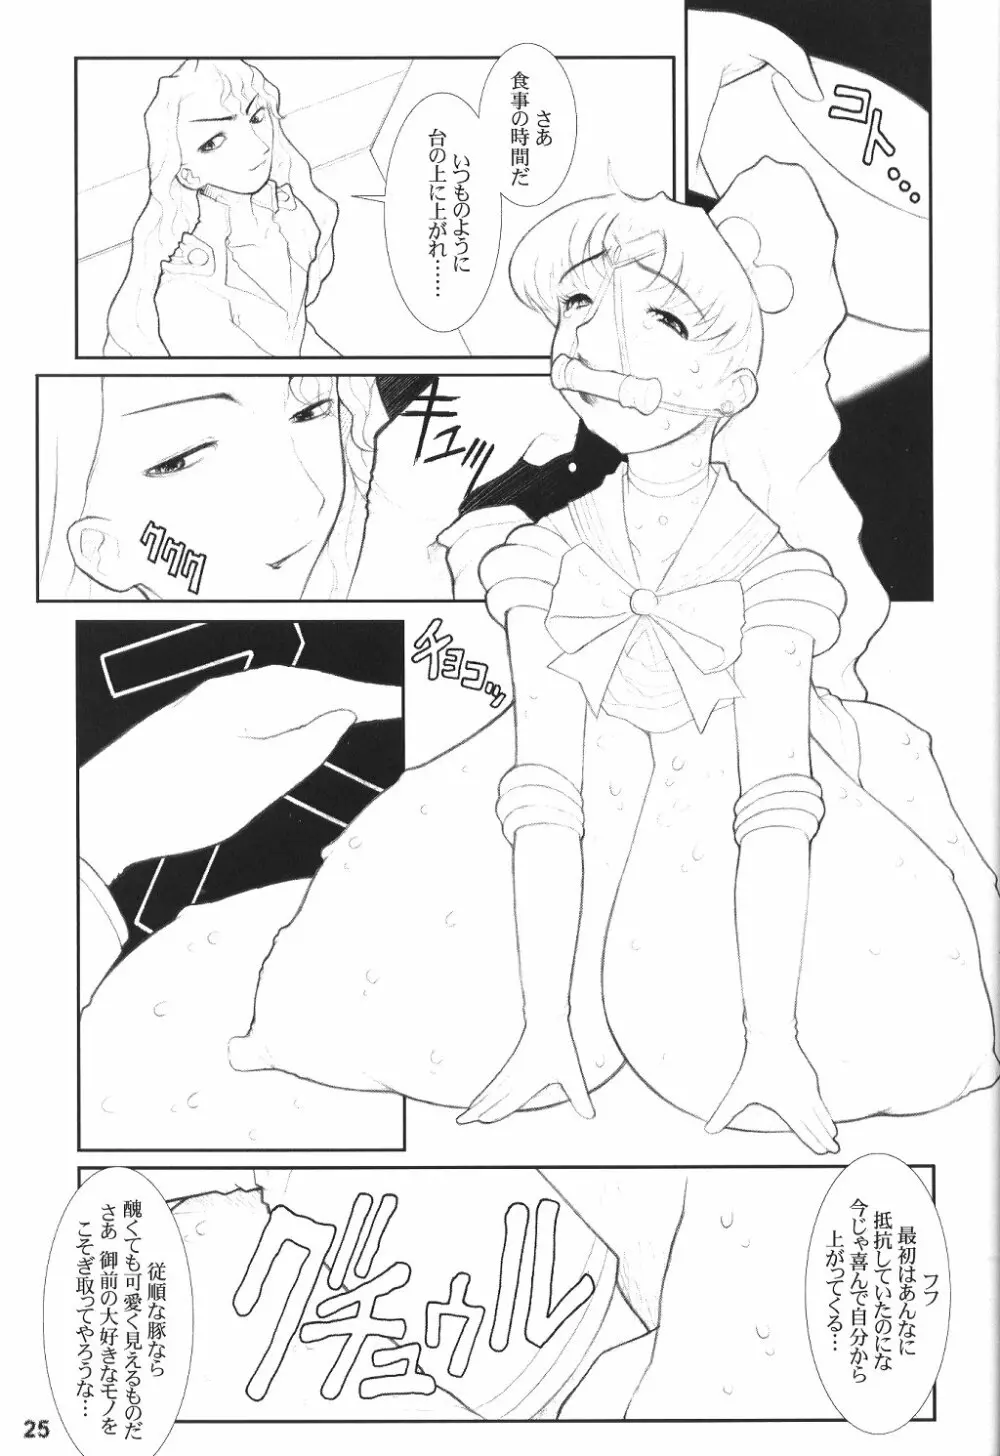 MaD ArtistS SailoR MooN Page.24